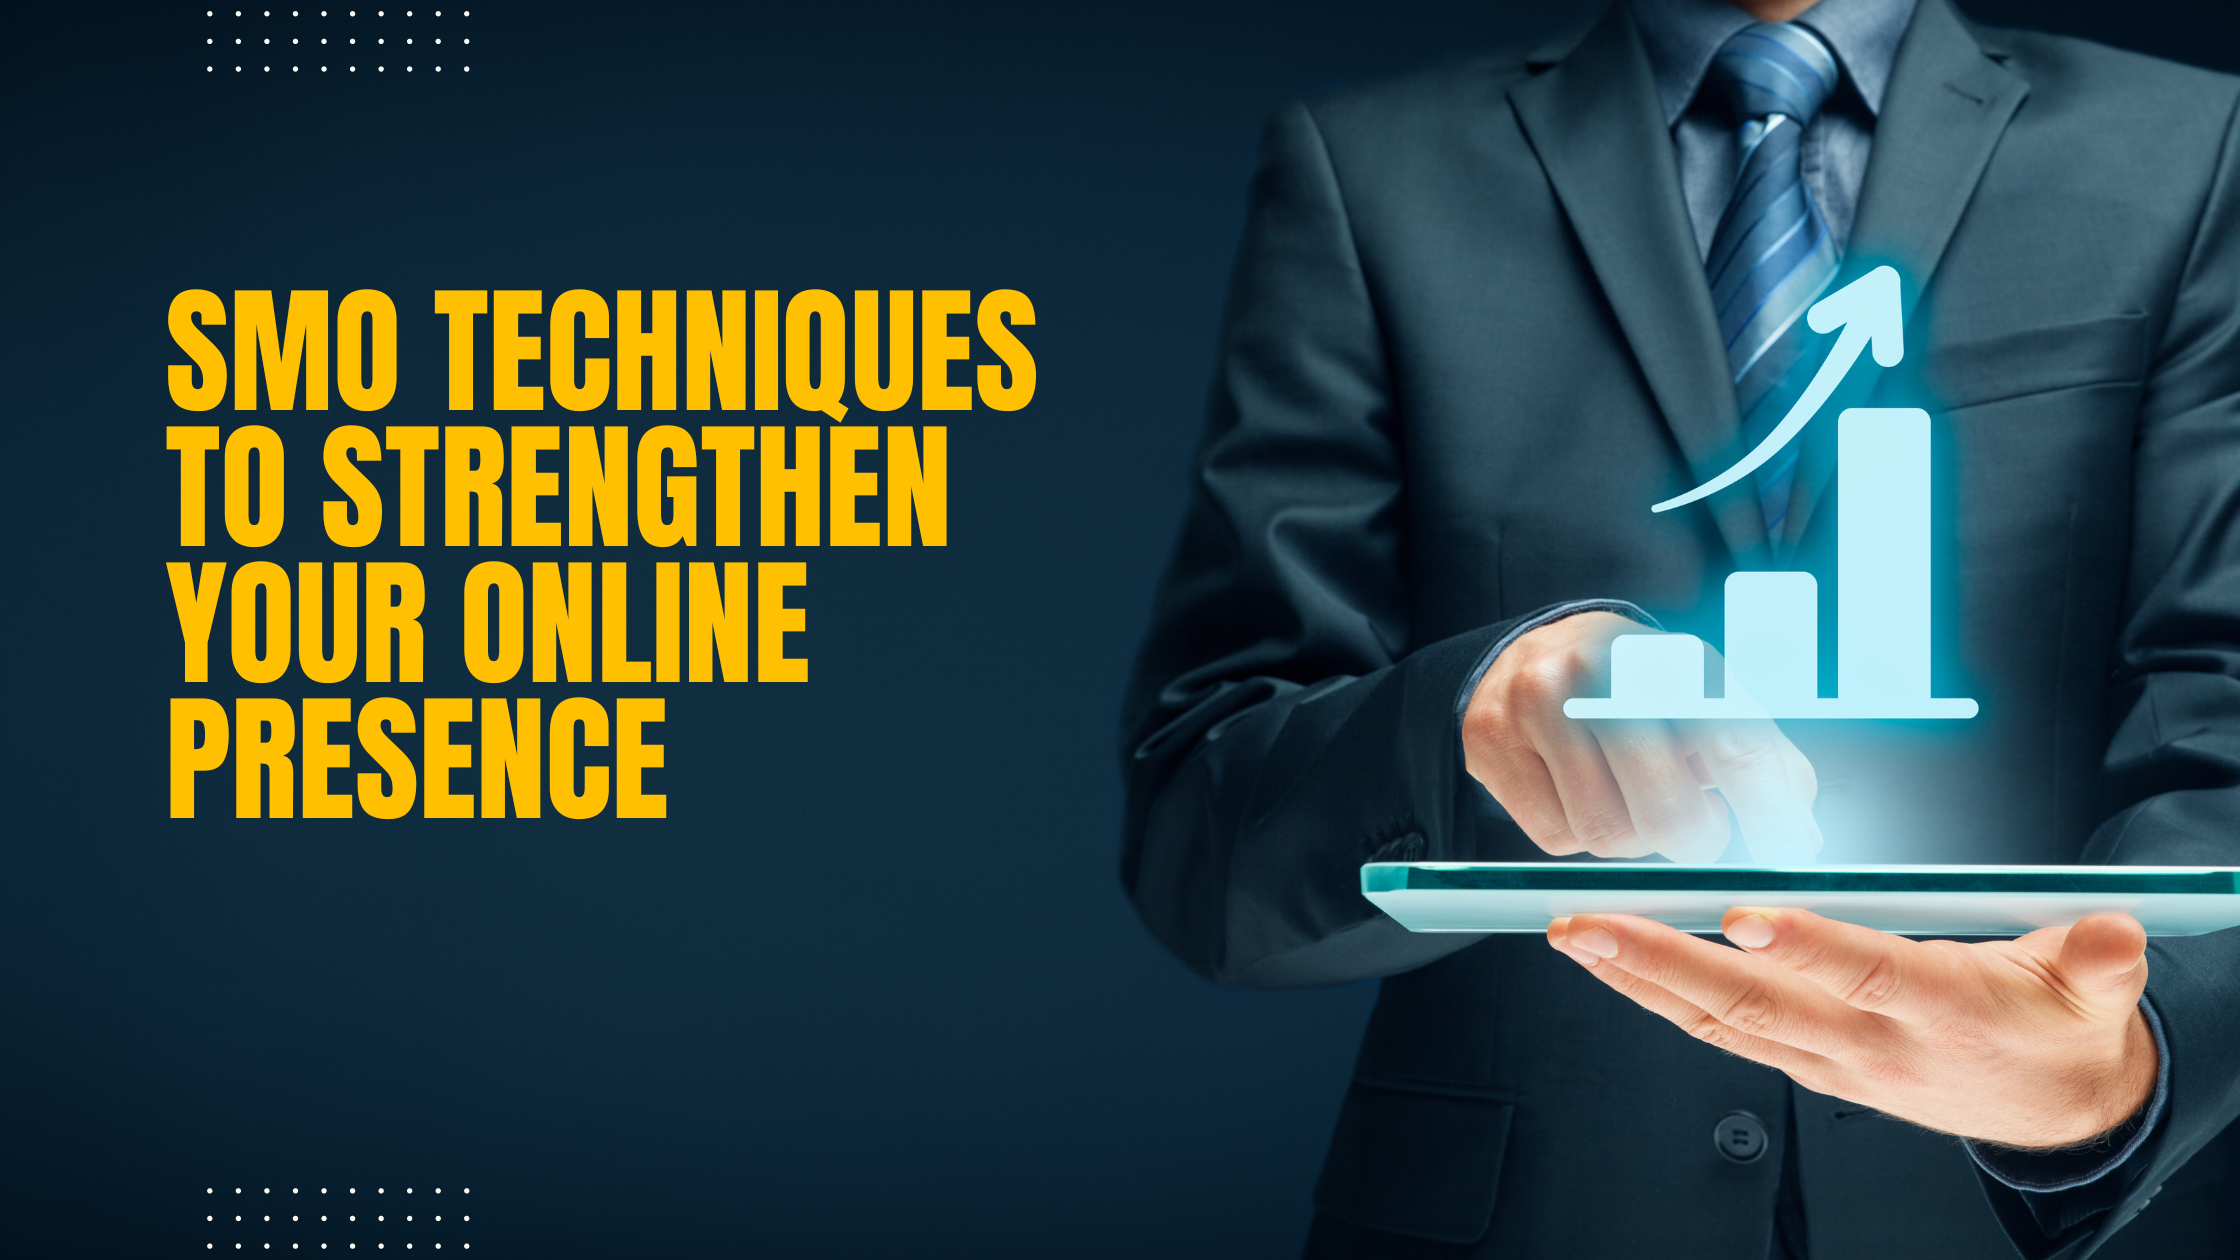 Top 7 SMO Techniques to Strengthen your Online Presence